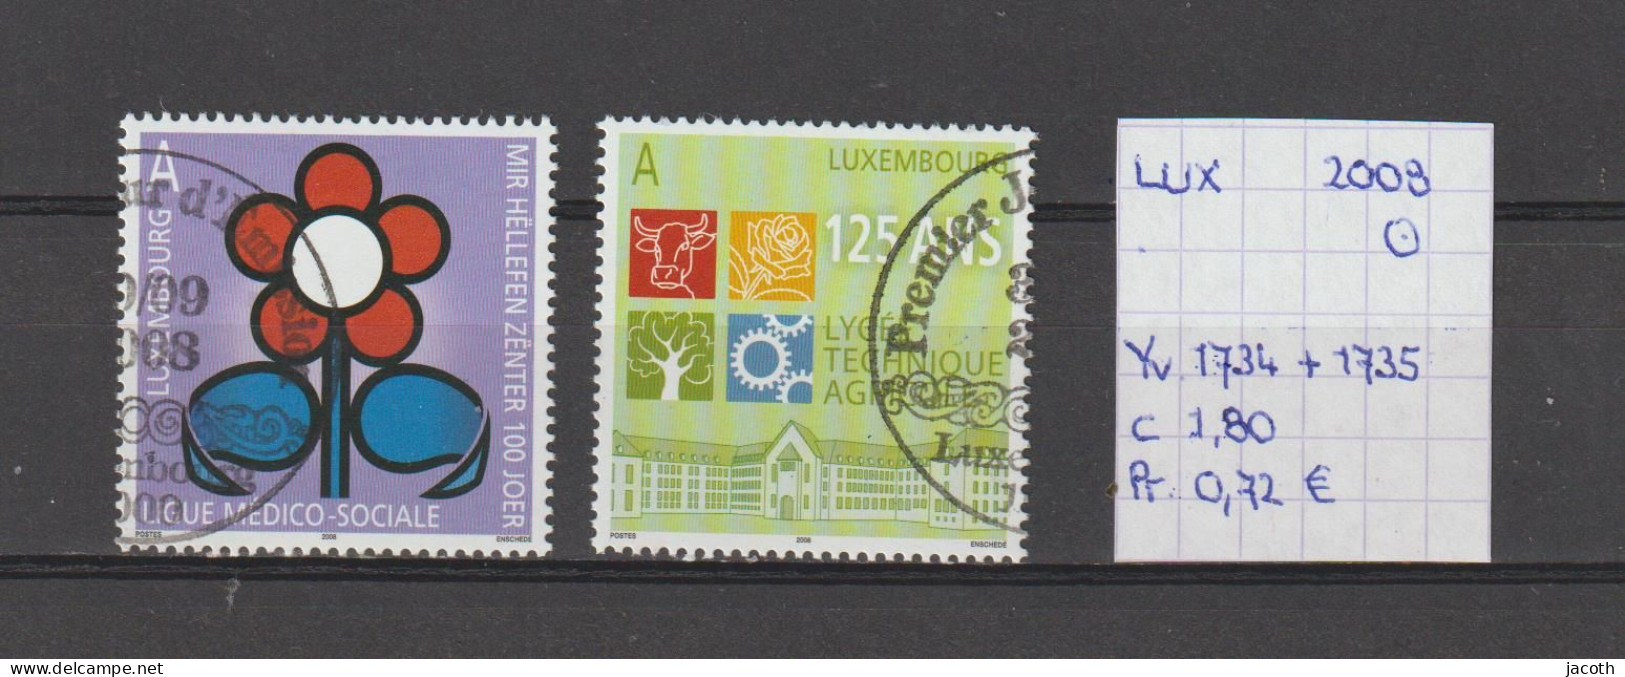 (TJ) Luxembourg 2008 - YT 1734 + 1735 (gest./obl./used) - Used Stamps